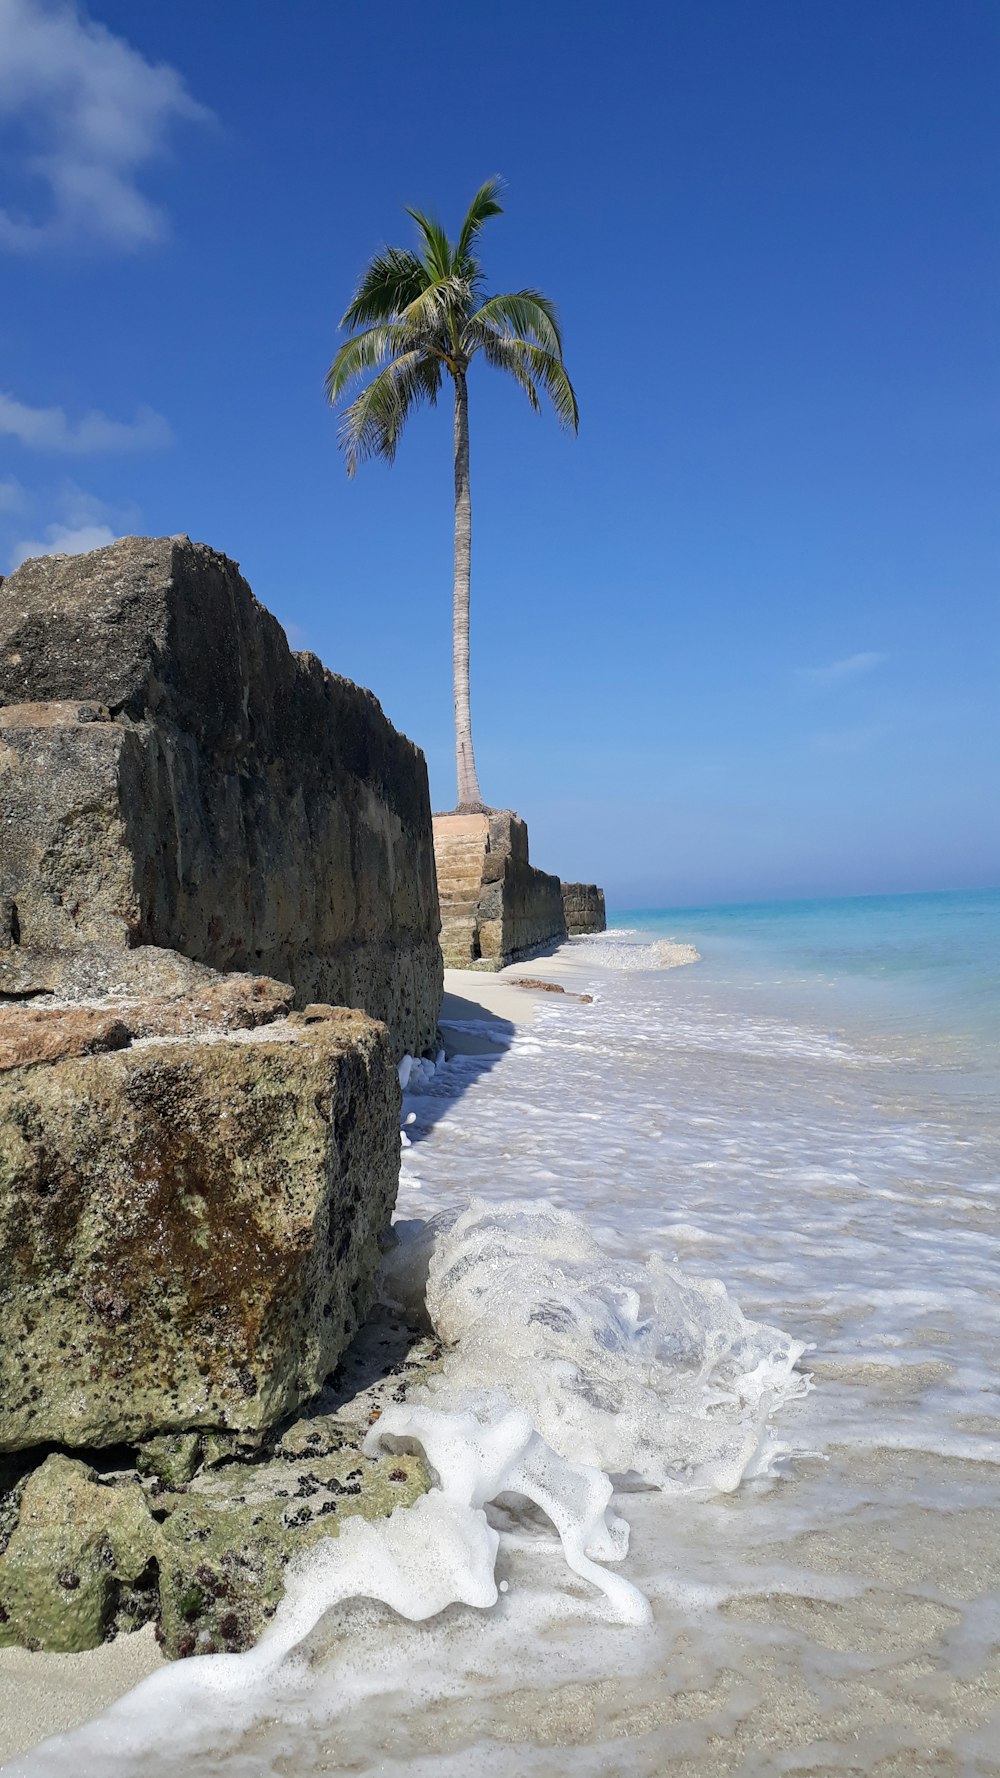 a palm tree on a rocky beach next to the ocean